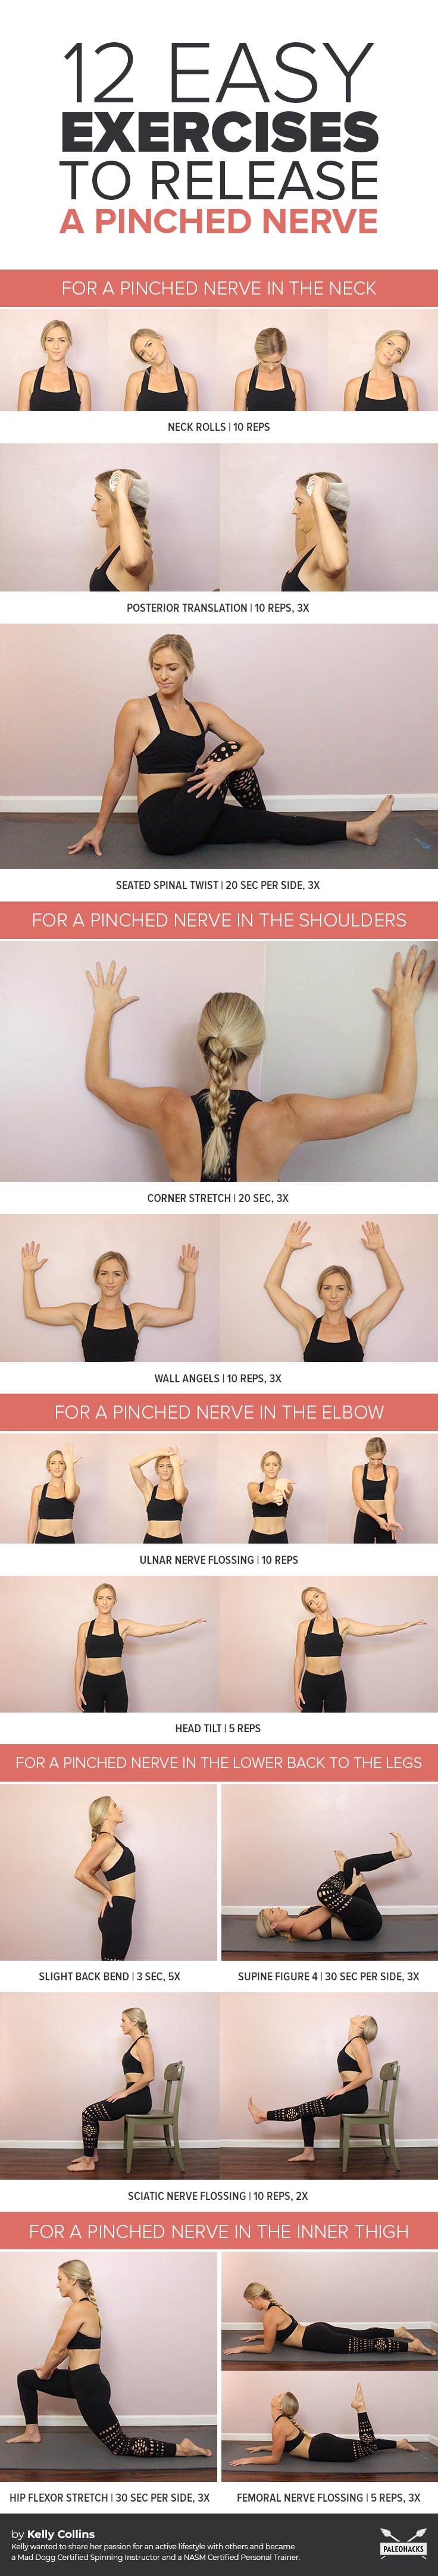 If you’ve ever had a pinched nerve, you know how painful it can be. No matter where you’re feeling the pinch, you can get quick relief with these easy exercises.